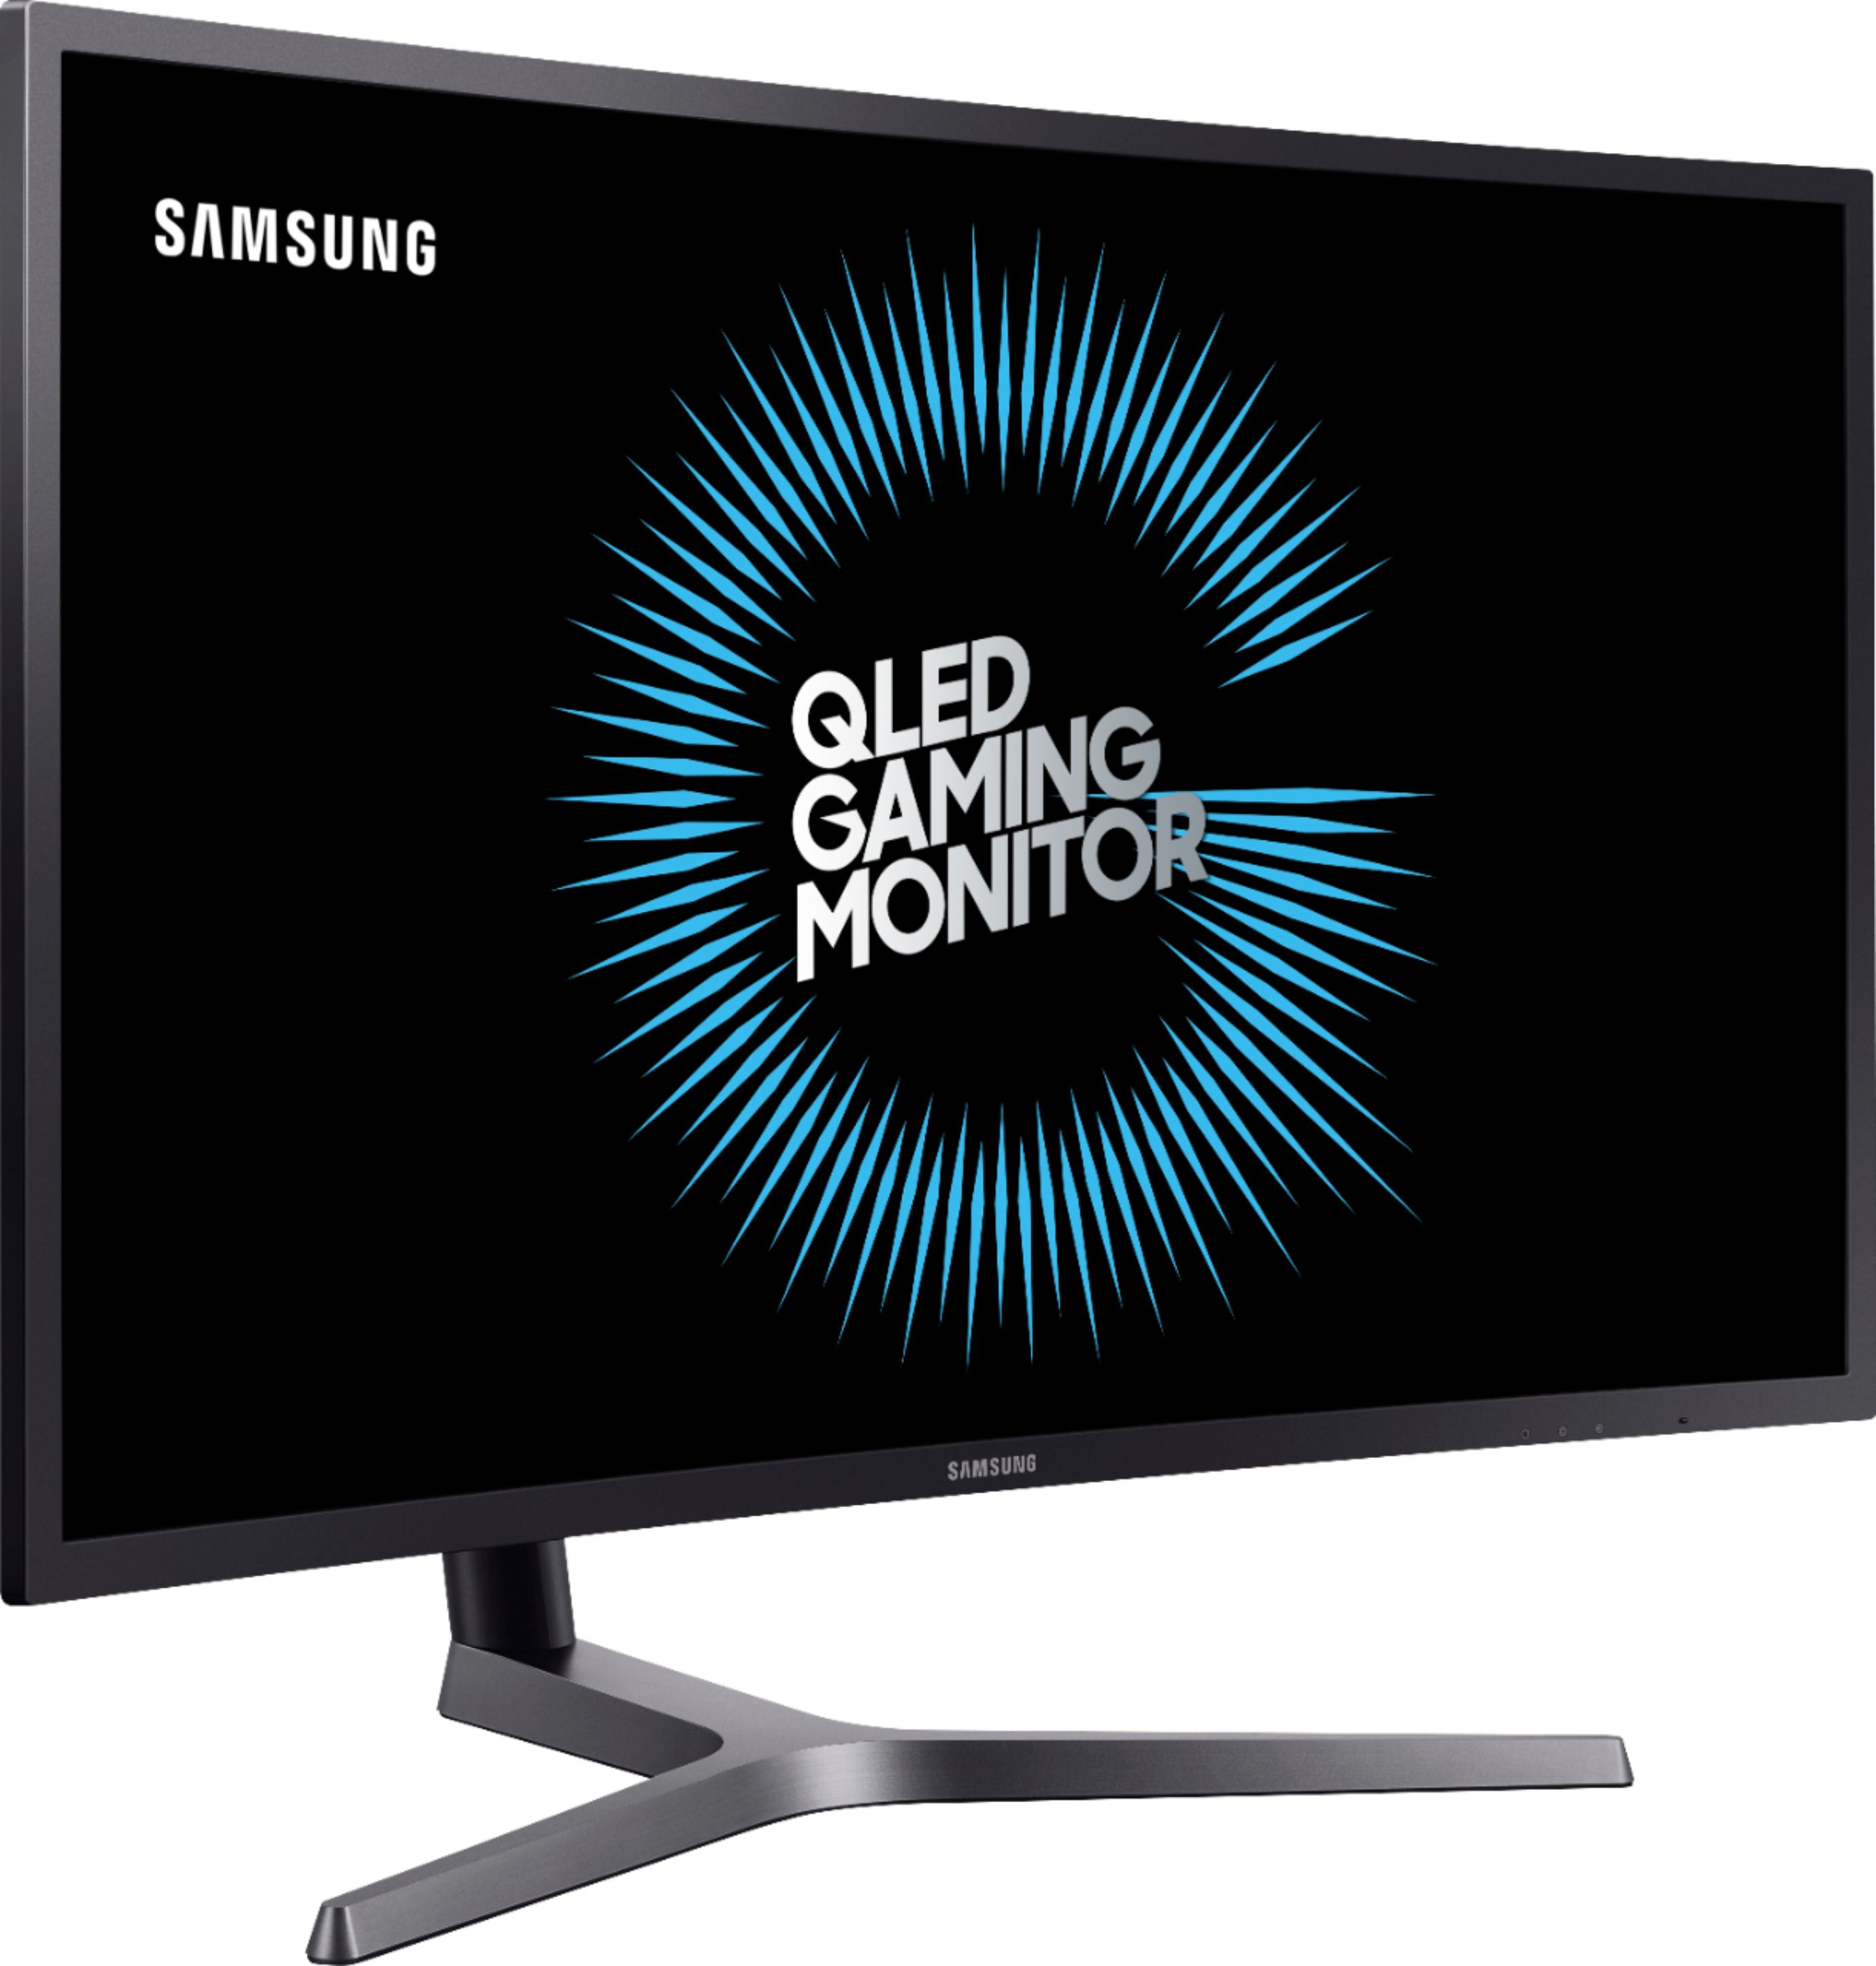 Angle View: Samsung - Geek Squad Certified Refurbished 27" LED Curved QHD FreeSync Monitor with HDR - Matte Dark Blue/Black